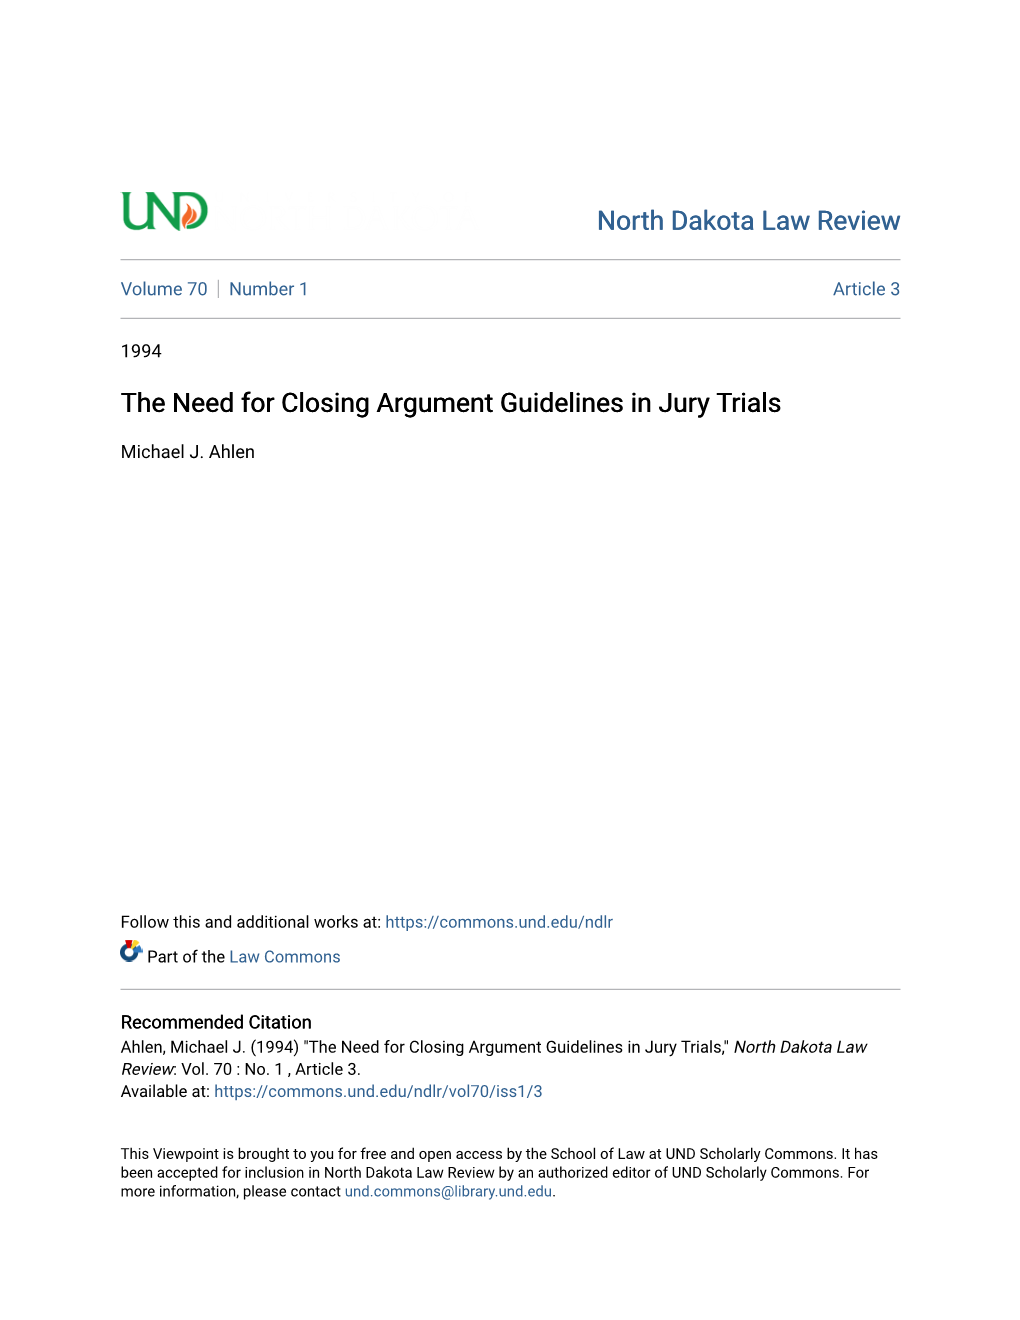 The Need for Closing Argument Guidelines in Jury Trials